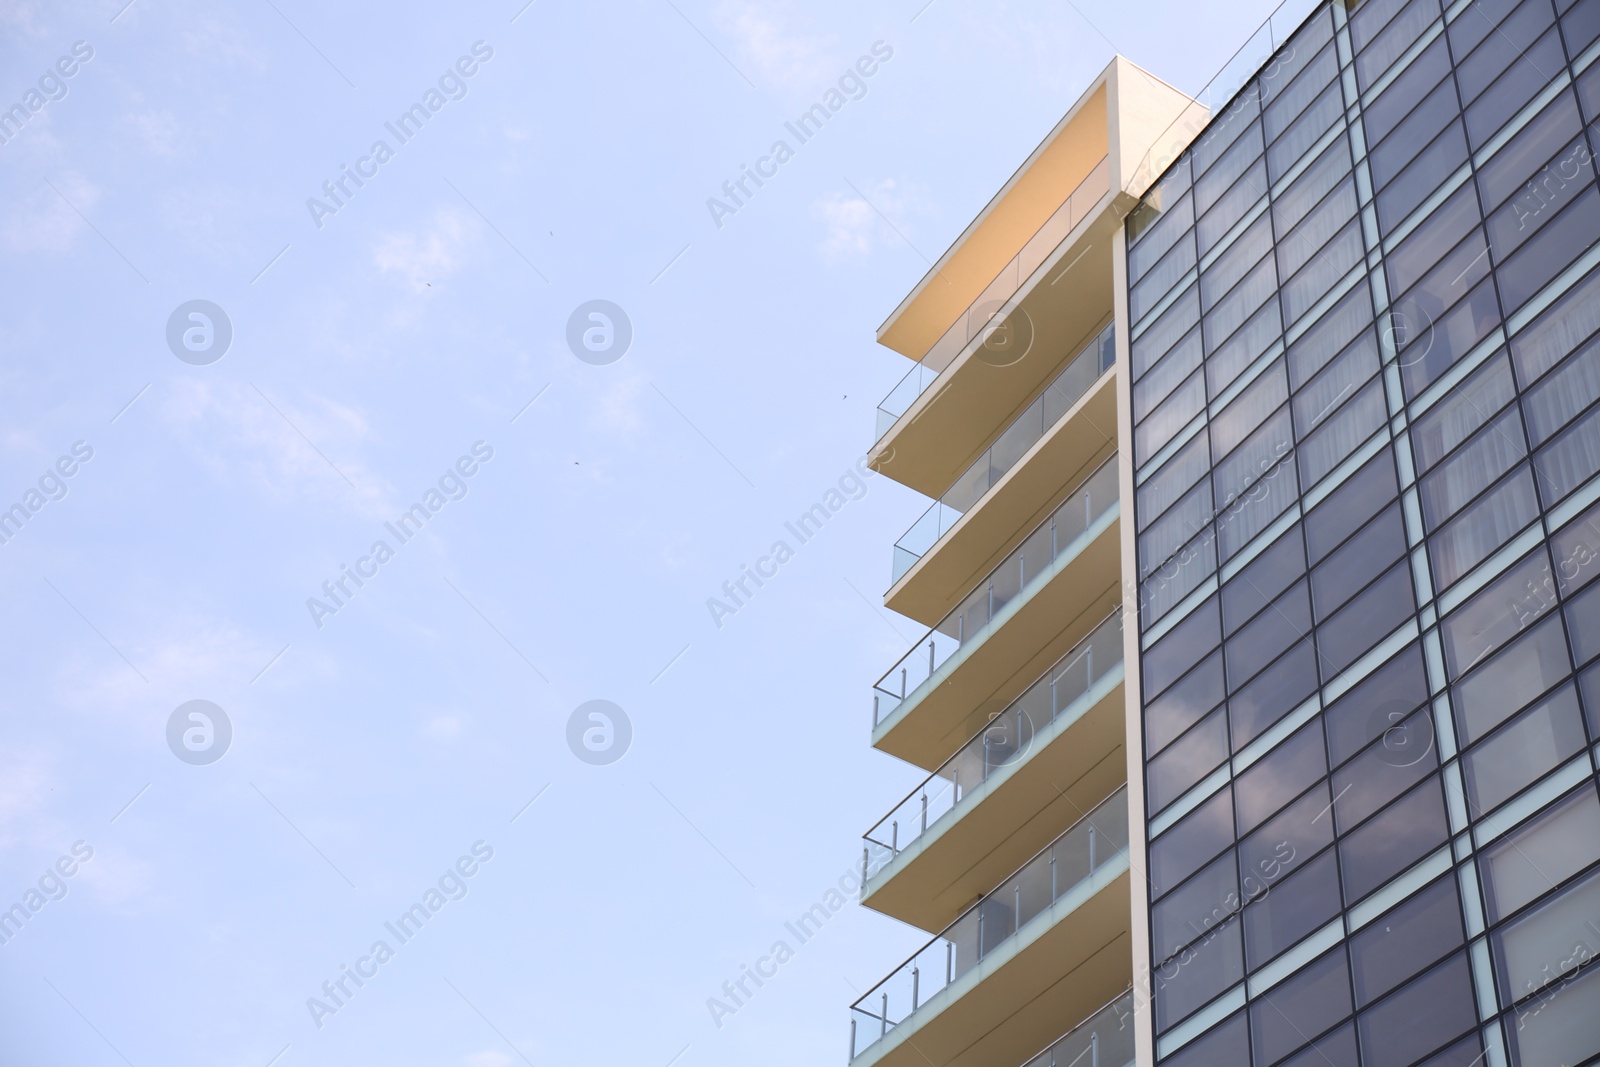 Photo of Modern building with big windows against blue sky outdoors, low angle view. Space for text